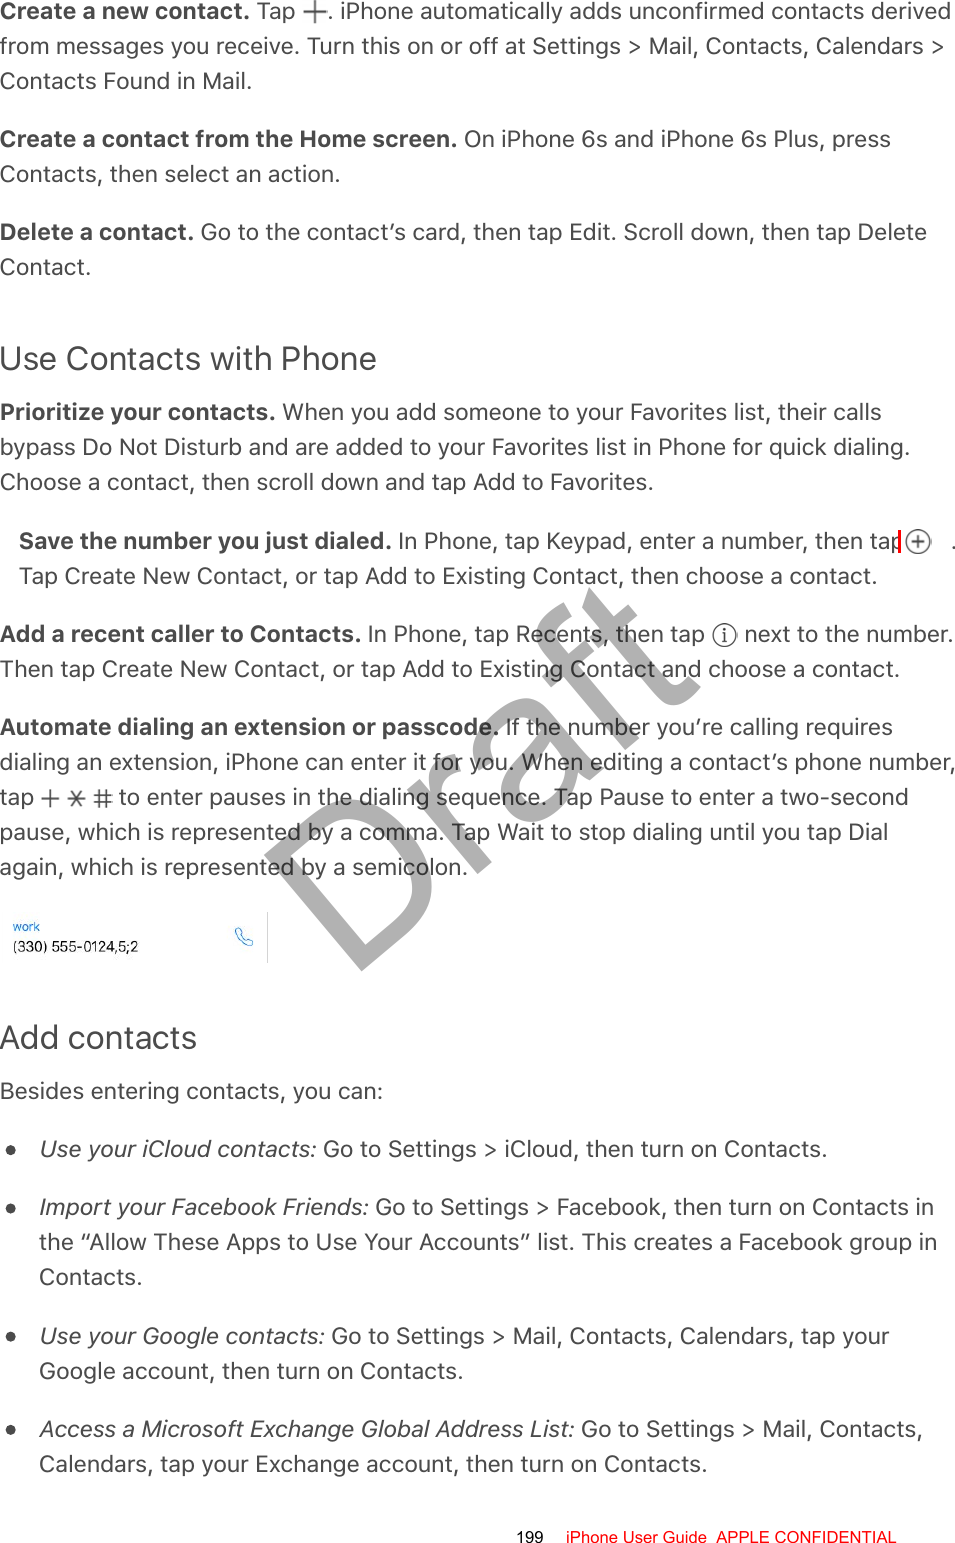 Create a new contact. Tap  . iPhone automatically adds unconfirmed contacts derivedfrom messages you receive. Turn this on or off at Settings &gt; Mail, Contacts, Calendars &gt;Contacts Found in Mail.Create a contact from the Home screen. On iPhone 6s and iPhone 6s Plus, pressContacts, then select an action.Delete a contact. Go to the contact’s card, then tap Edit. Scroll down, then tap DeleteContact.Use Contacts with PhonePrioritize your contacts. When you add someone to your Favorites list, their callsbypass Do Not Disturb and are added to your Favorites list in Phone for quick dialing.Choose a contact, then scroll down and tap Add to Favorites.Save the number you just dialed. In Phone, tap Keypad, enter a number, then tap  .Tap Create New Contact, or tap Add to Existing Contact, then choose a contact.Add a recent caller to Contacts. In Phone, tap Recents, then tap   next to the number.Then tap Create New Contact, or tap Add to Existing Contact and choose a contact.Automate dialing an extension or passcode. If the number you’re calling requiresdialing an extension, iPhone can enter it for you. When editing a contact’s phone number,tap   to enter pauses in the dialing sequence. Tap Pause to enter a two-secondpause, which is represented by a comma. Tap Wait to stop dialing until you tap Dialagain, which is represented by a semicolon.Add contactsBesides entering contacts, you can:Use your iCloud contacts: Go to Settings &gt; iCloud, then turn on Contacts.Import your Facebook Friends: Go to Settings &gt; Facebook, then turn on Contacts inthe “Allow These Apps to Use Your Accounts” list. This creates a Facebook group inContacts.Use your Google contacts: Go to Settings &gt; Mail, Contacts, Calendars, tap yourGoogle account, then turn on Contacts.Access a Microsoft Exchange Global Address List: Go to Settings &gt; Mail, Contacts,Calendars, tap your Exchange account, then turn on Contacts.199 iPhone User Guide  APPLE CONFIDENTIALDraft